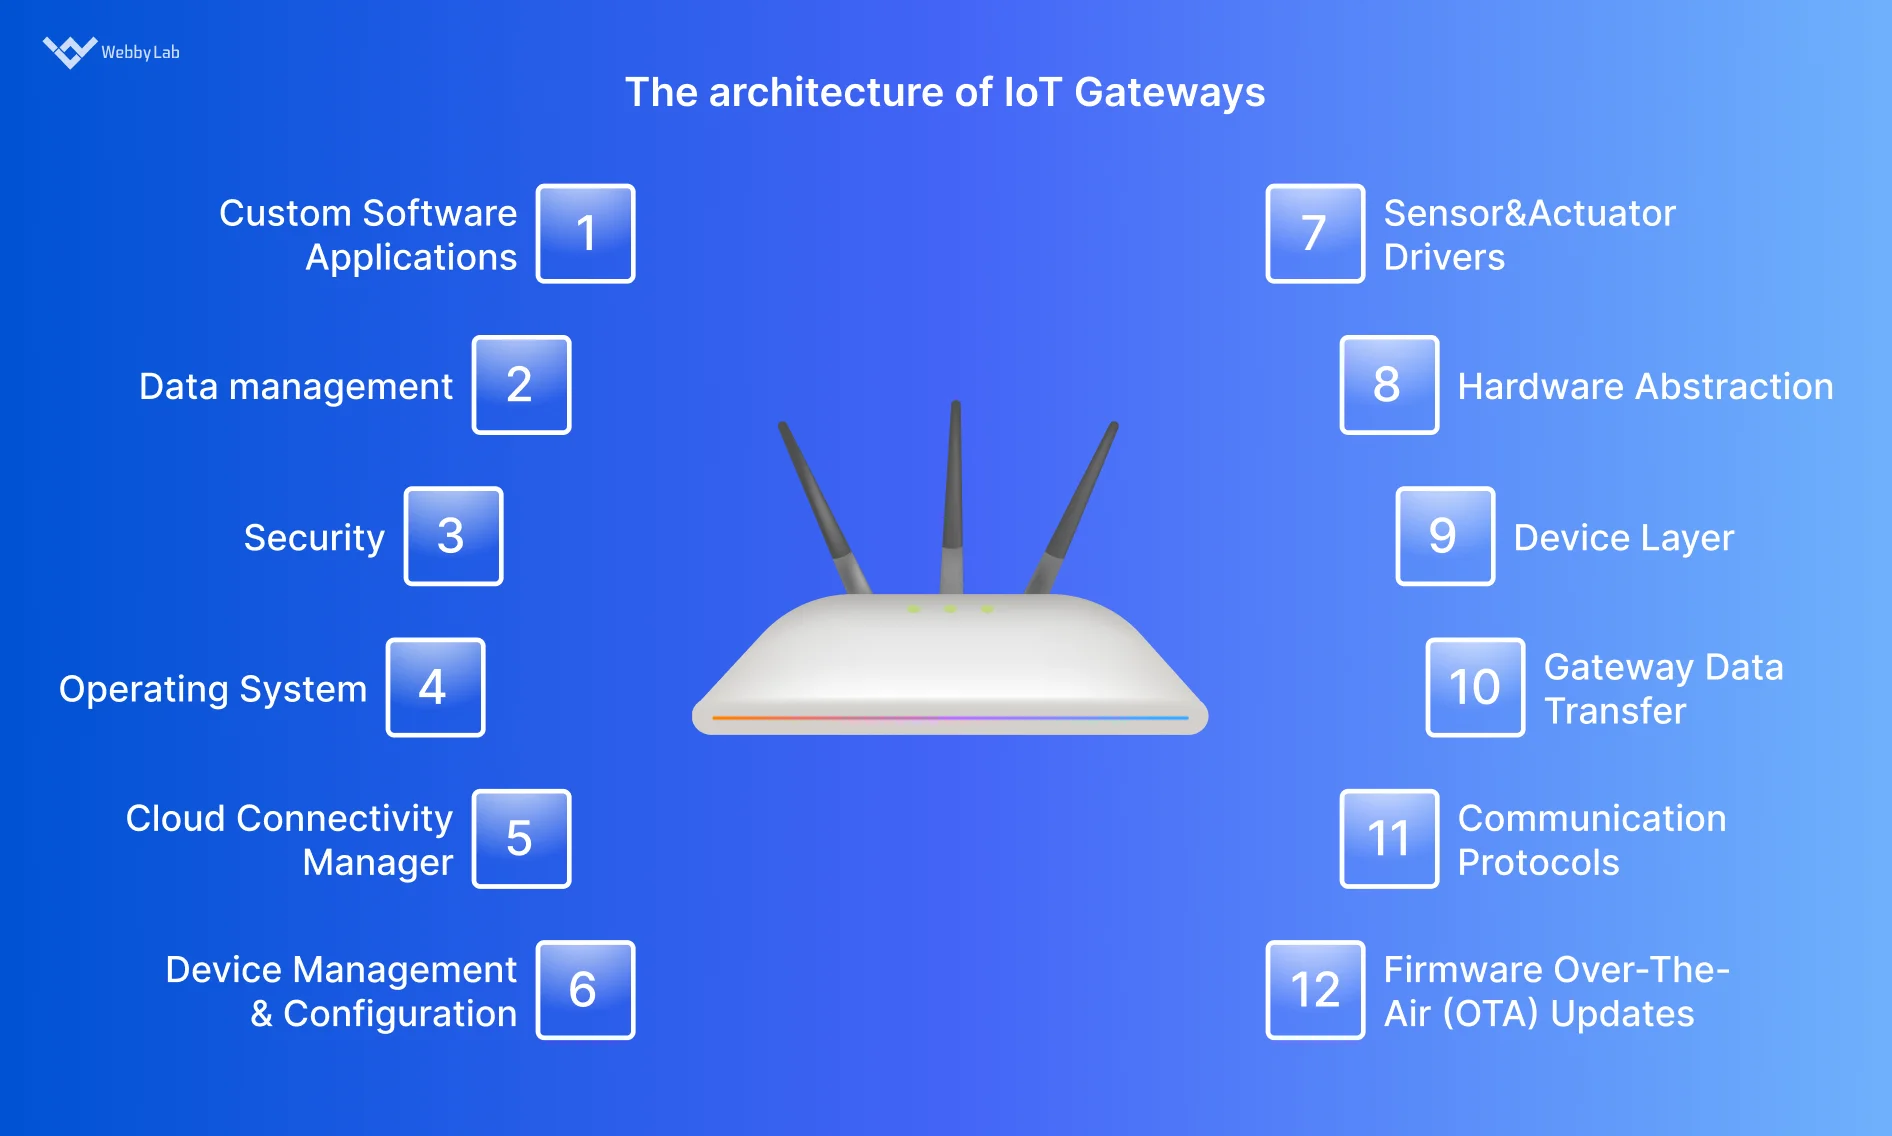 The architecture of IoT gateways.